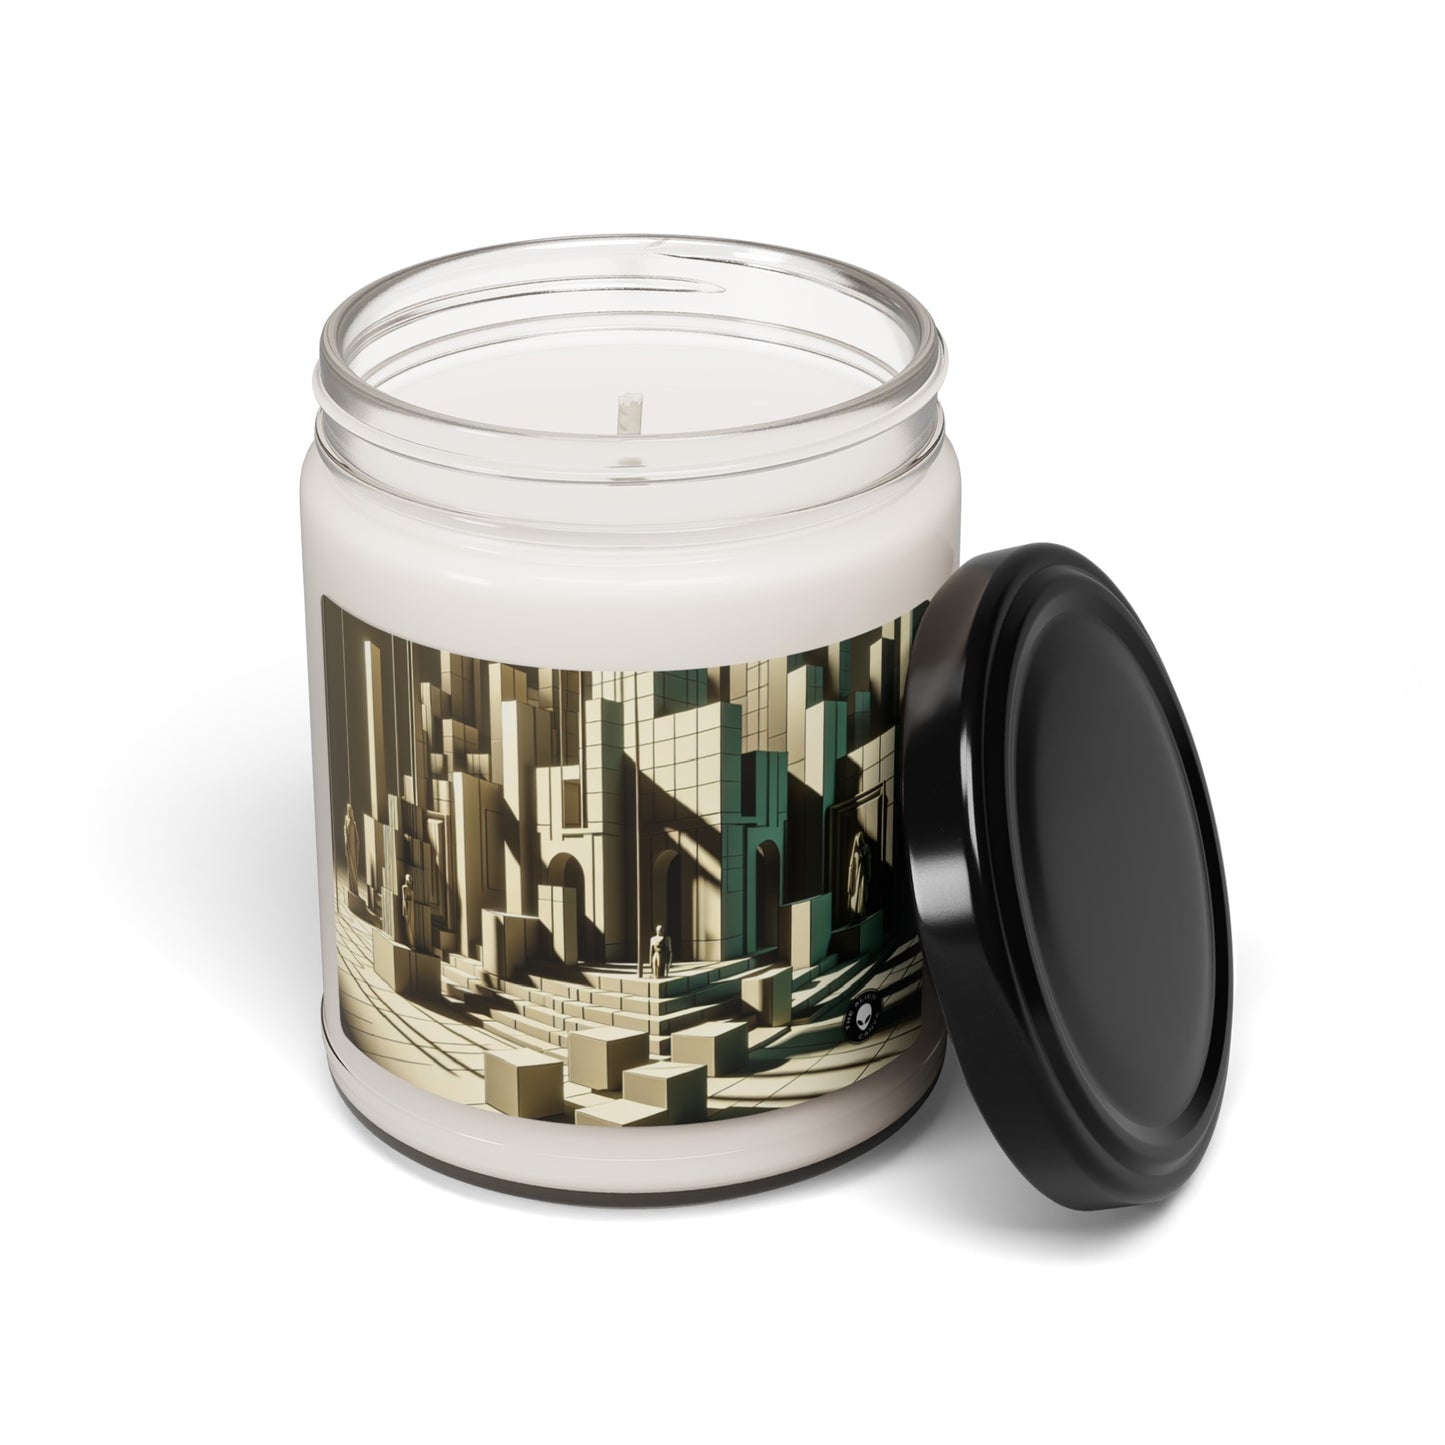 "Surreal Symphony: A Metaphysical Dreamworld" - The Alien Scented Soy Candle 9oz Metaphysical Art